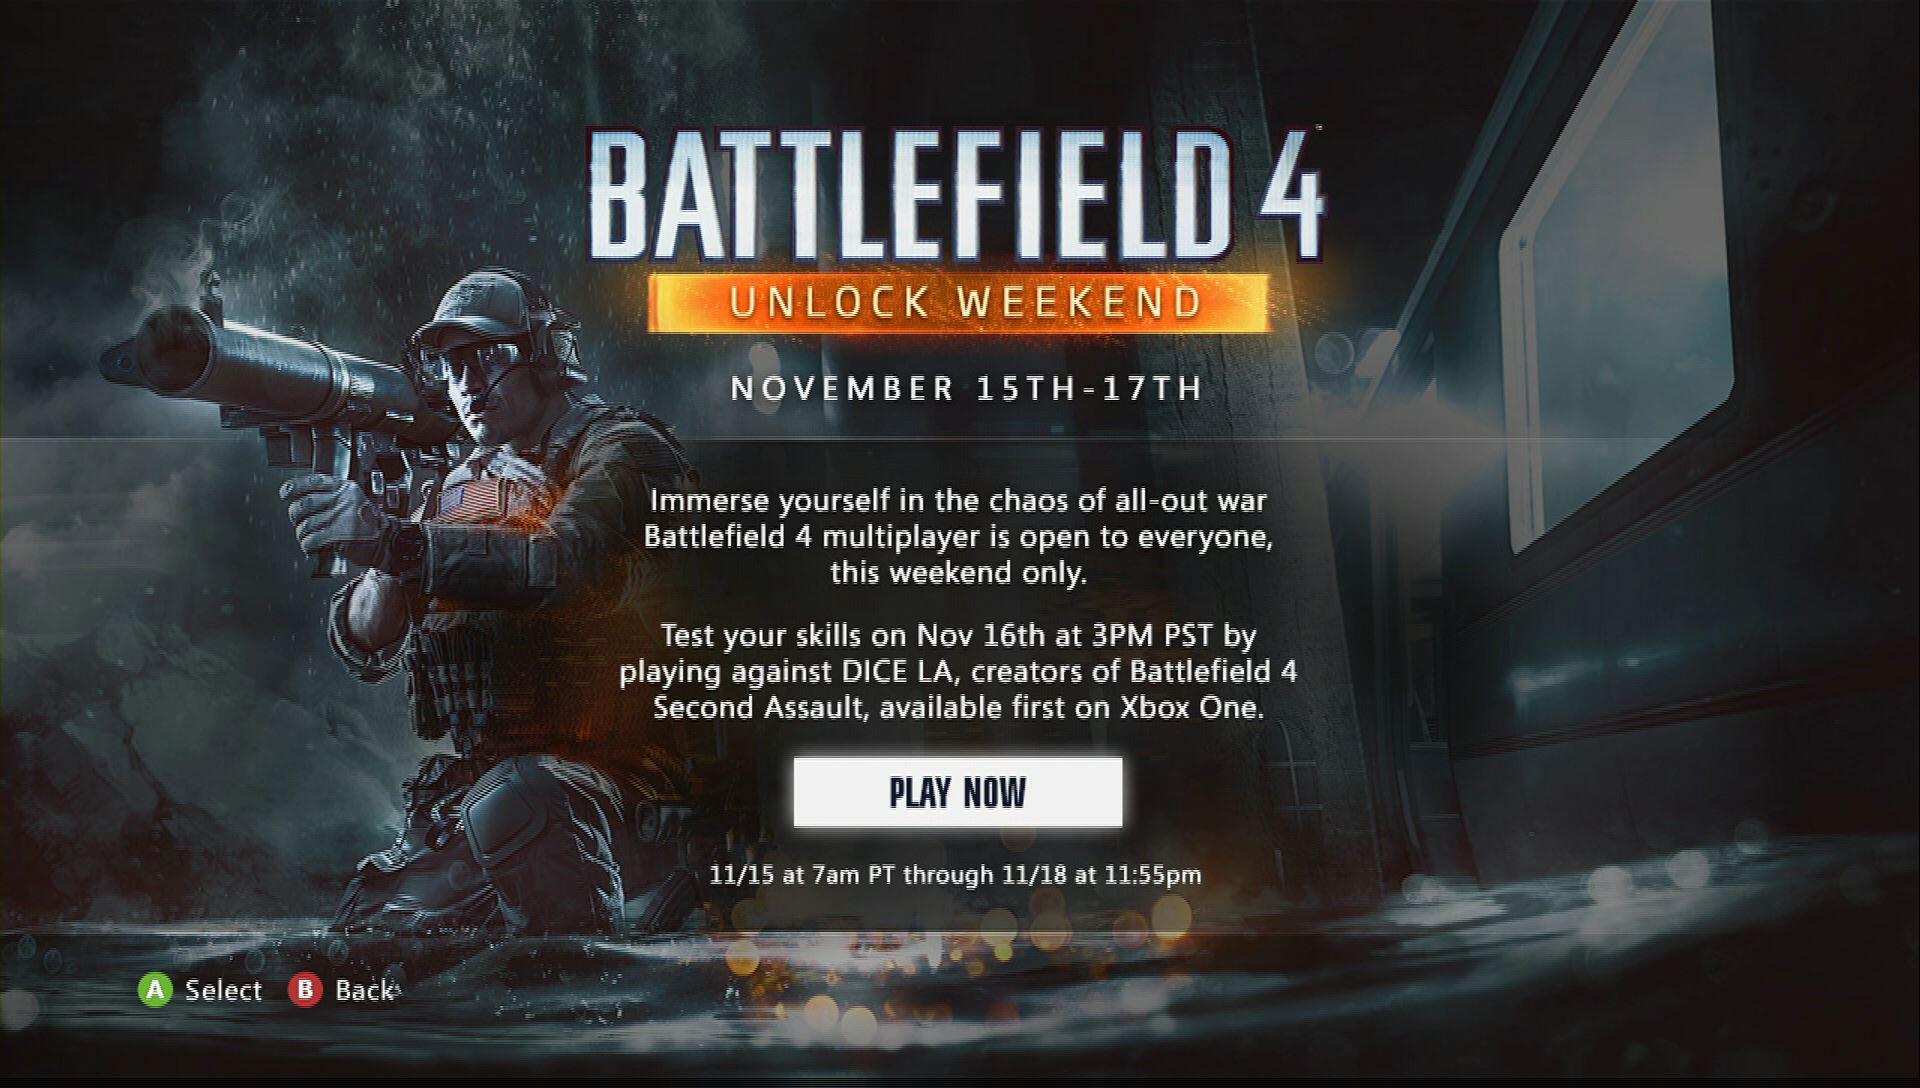 Xbox Take Advantage Of Our Battlefield 4 M Free Mp Weekend To Battle Dice La The Fun Starts At 3pm Pt Saturday 11 16 Http T Co Wmy3txi6ld Twitter